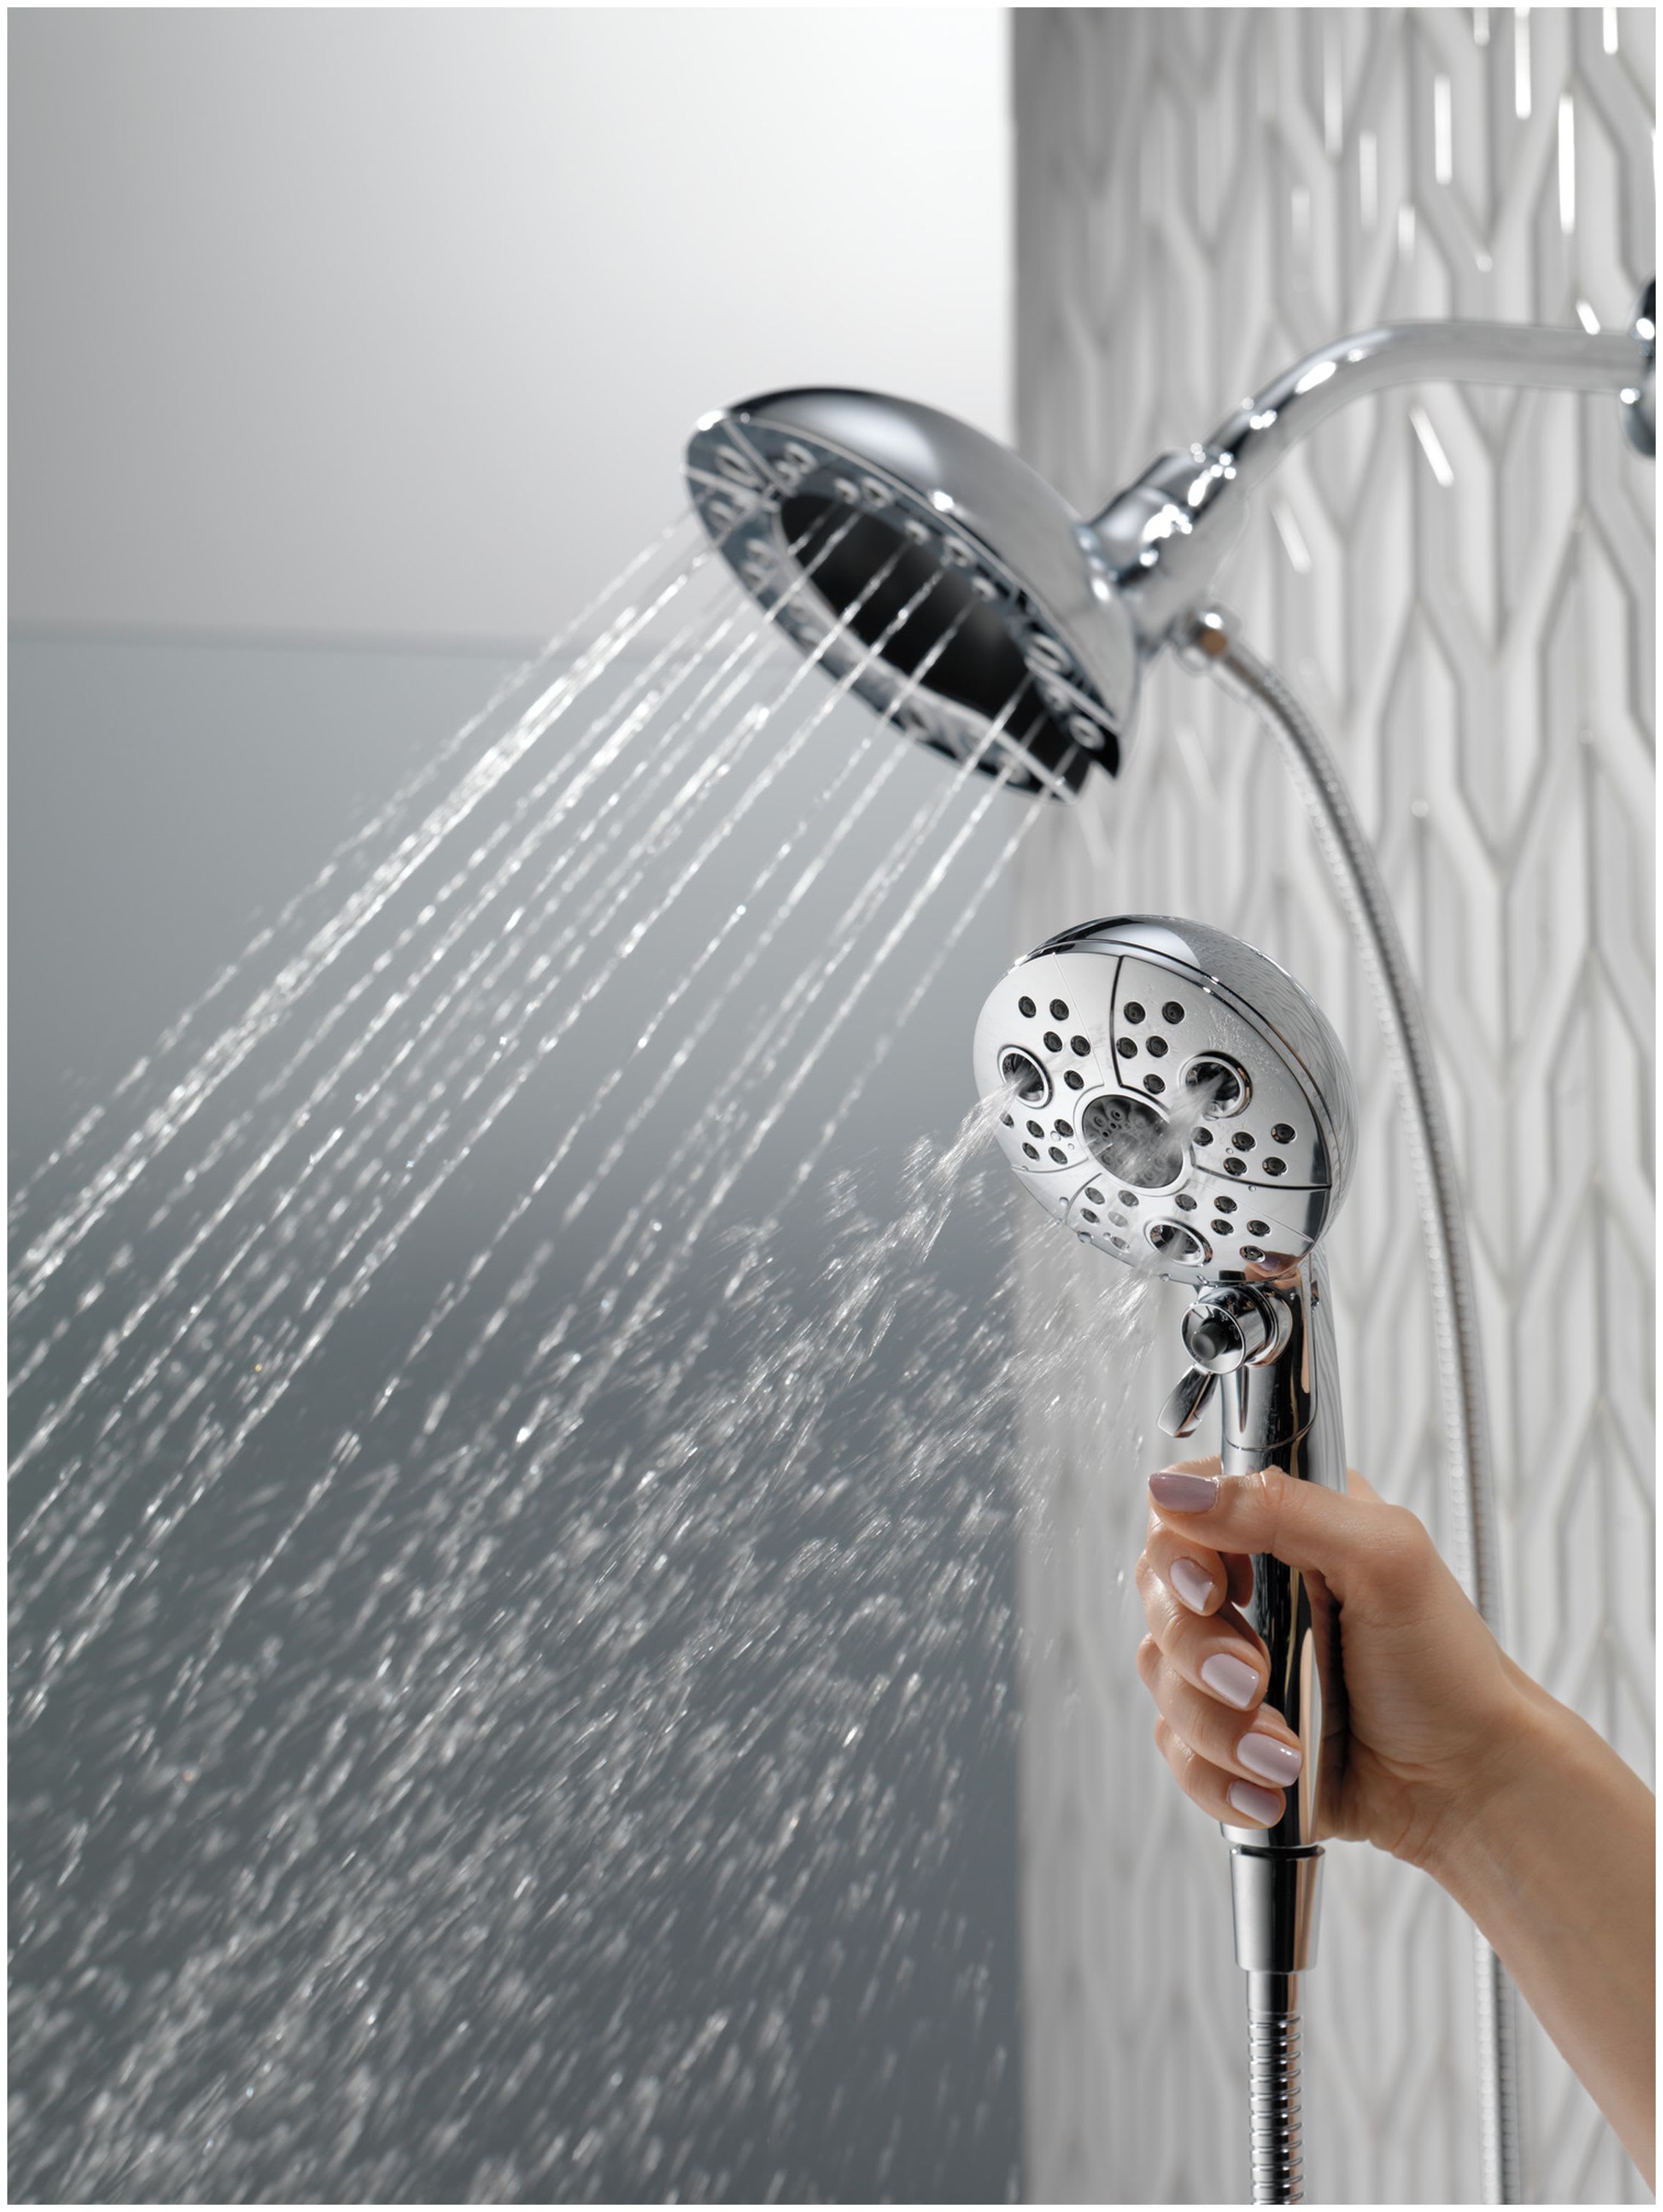 Delta 58480-25-PK Chrome In2ition 2.5 GPM Multi Function Shower Head with  Touch-Clean, MagnaTite, and H2Okinetic Technology